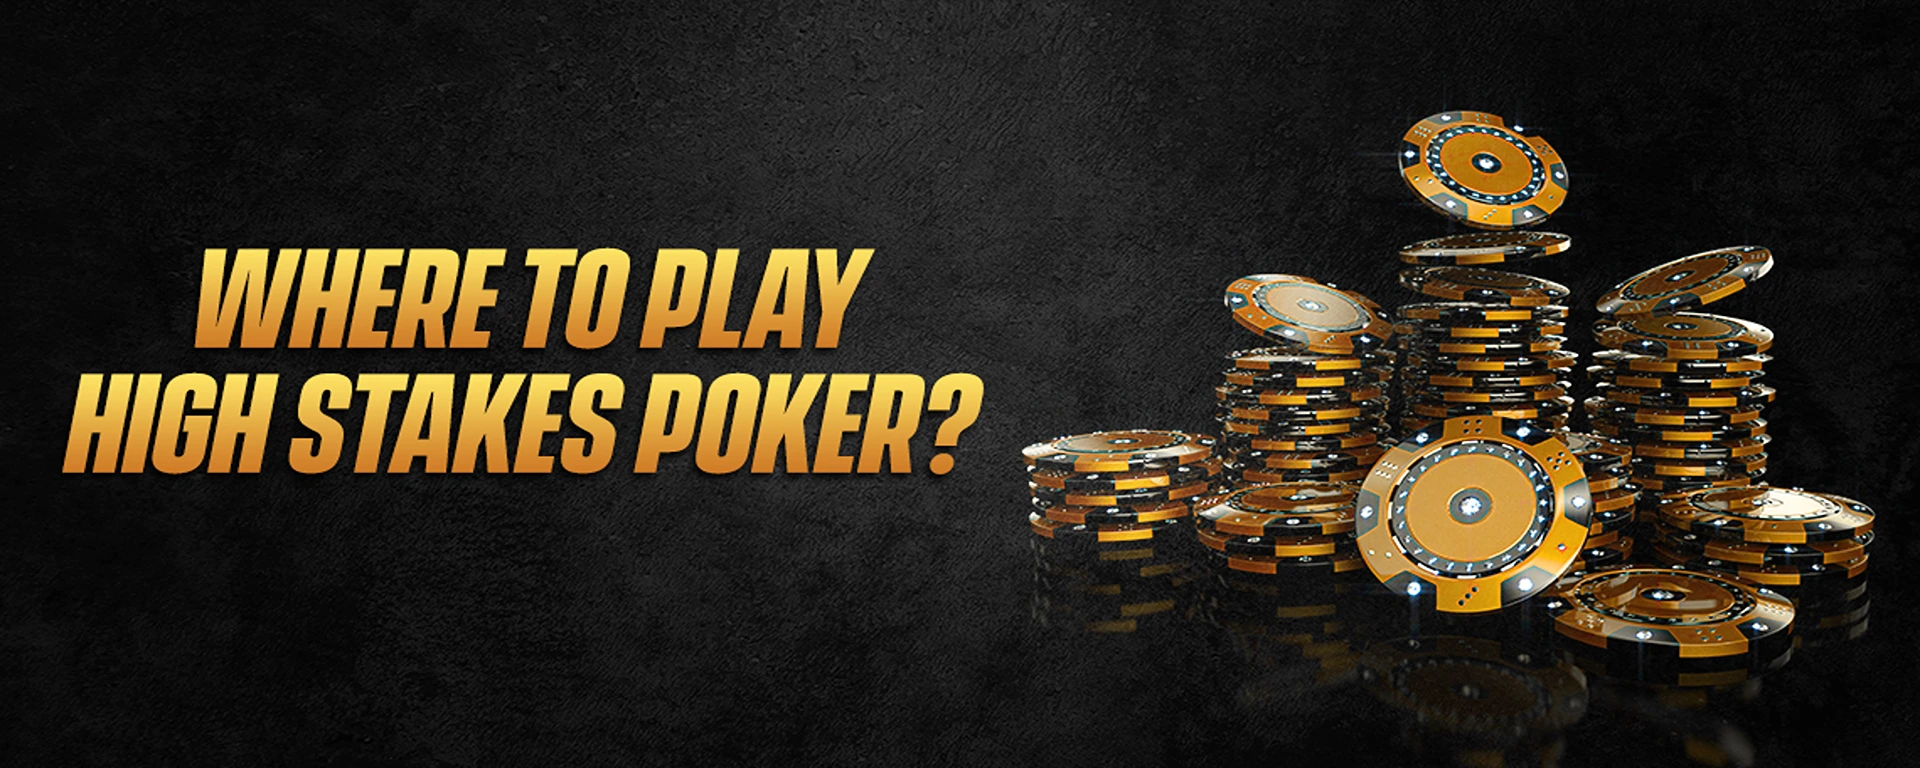 Where to Play High Stakes Poker Online